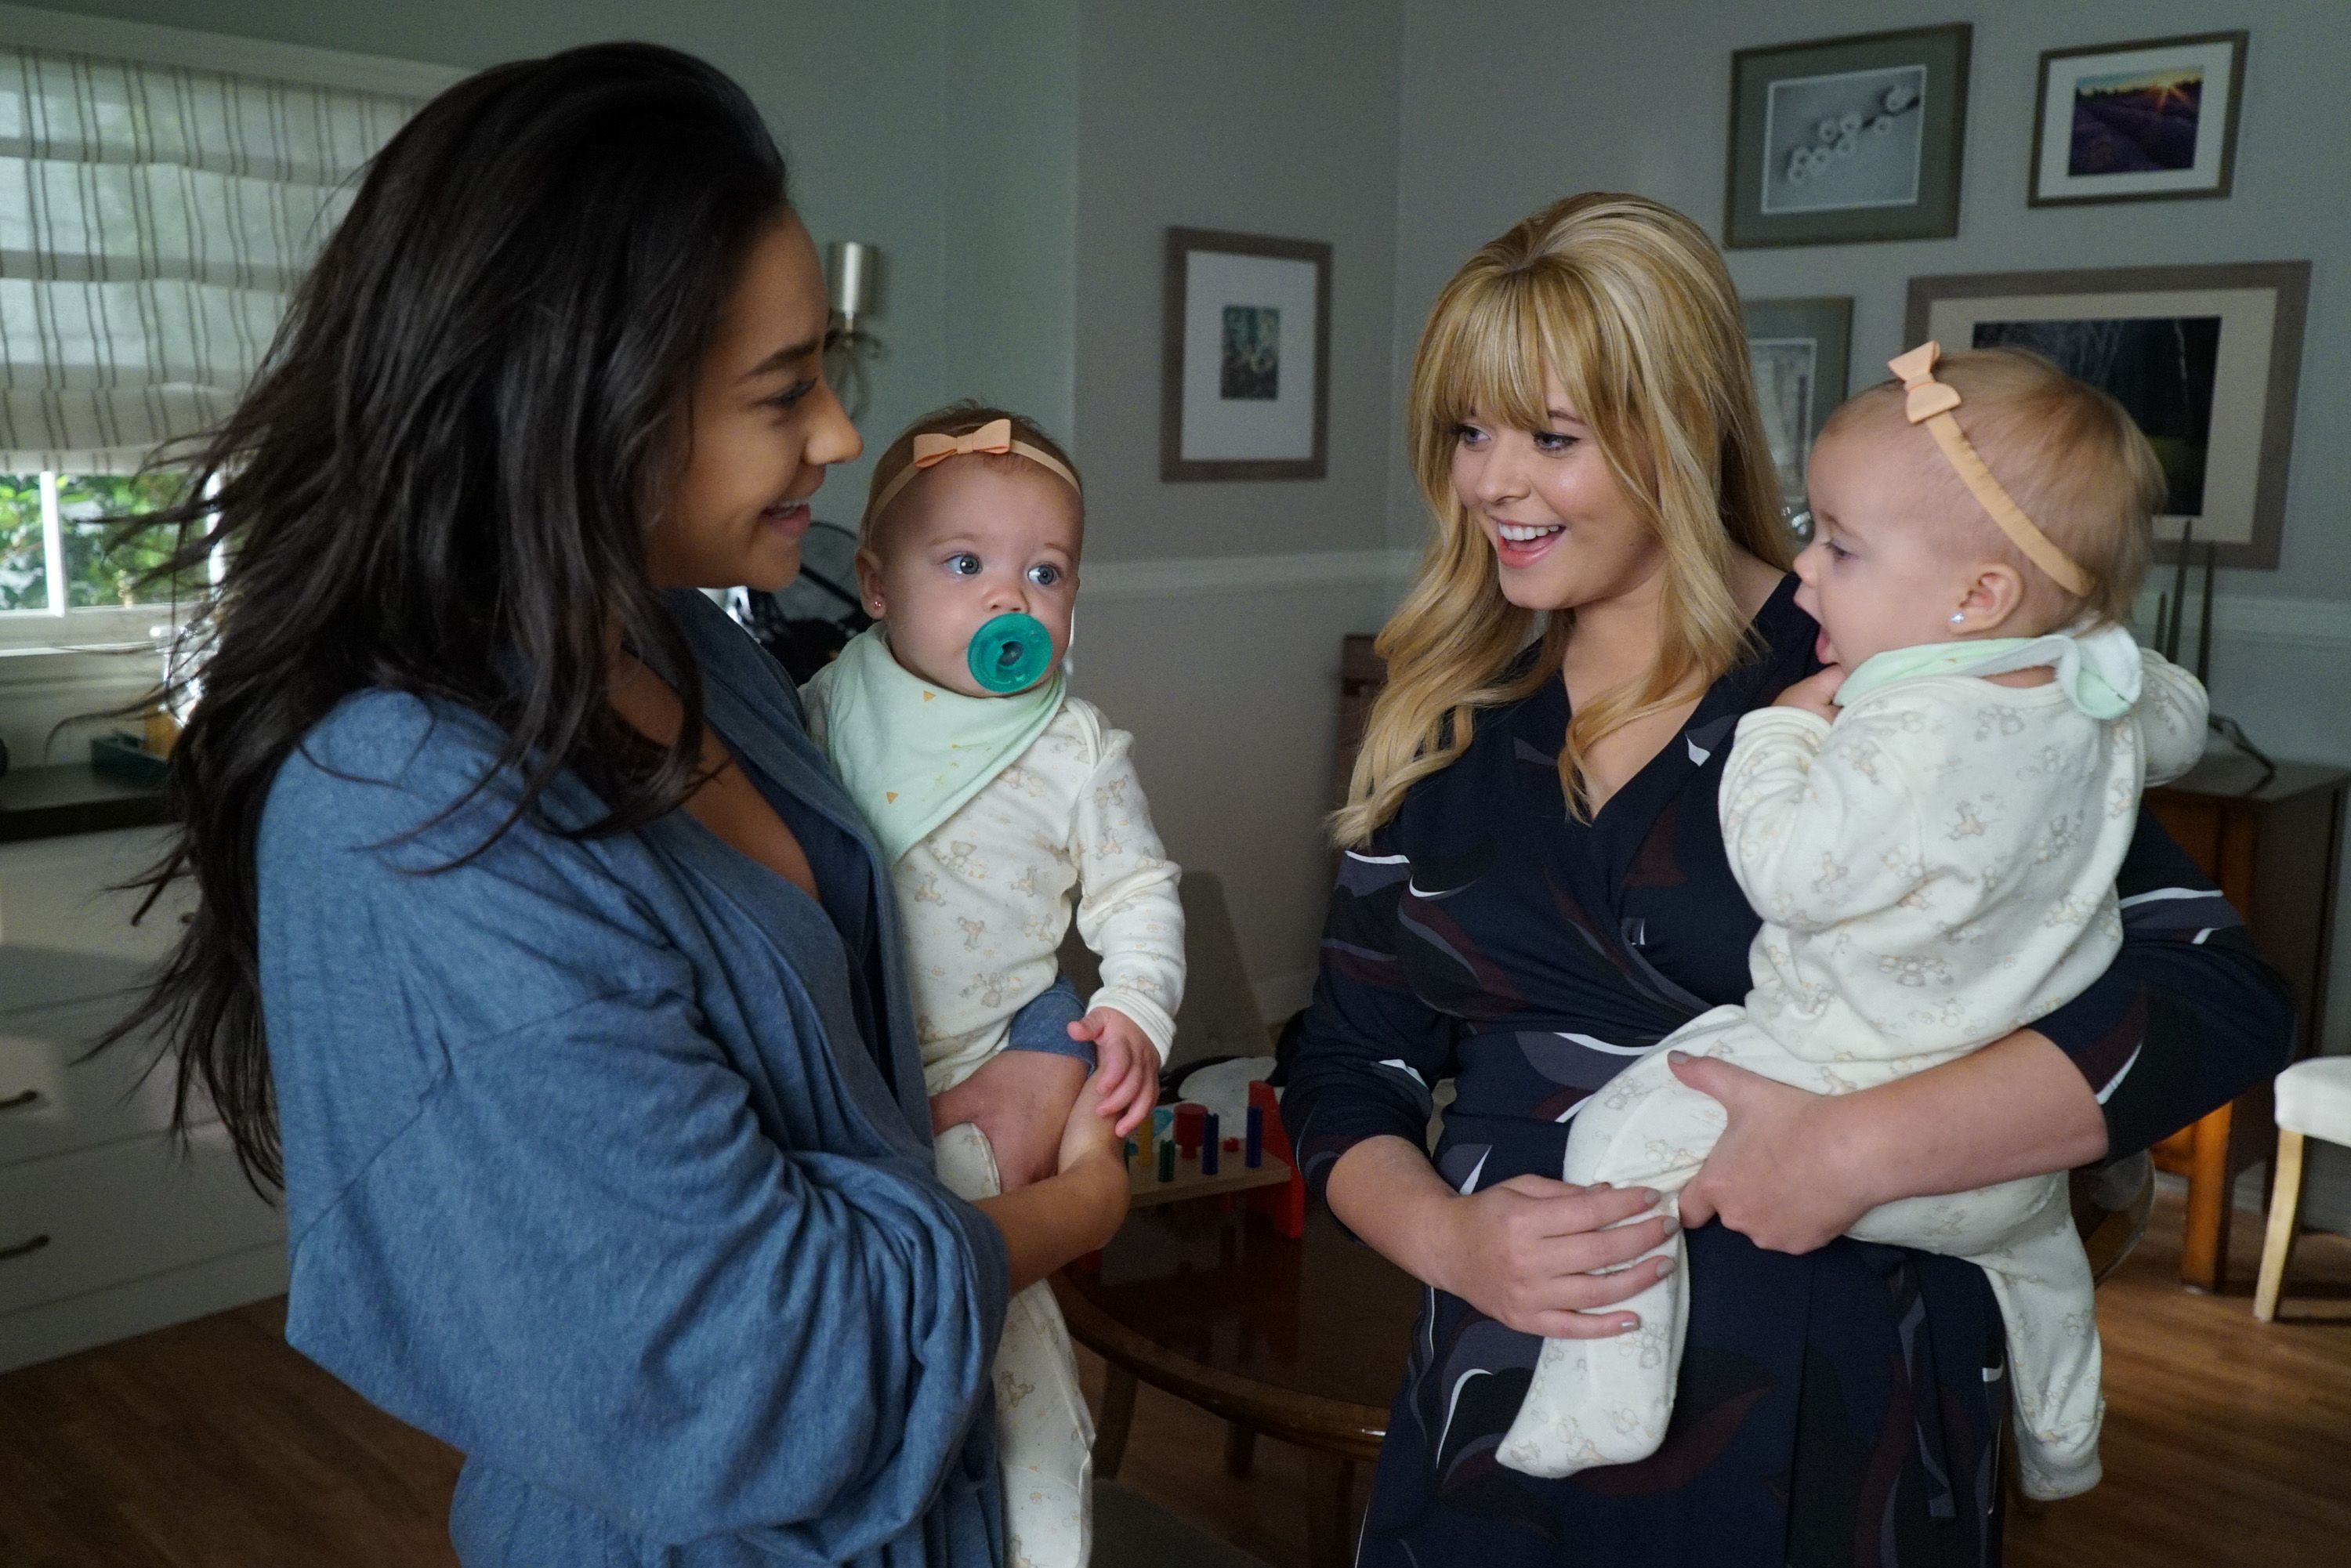 Pretty Little Liars Alison and Emily's Family